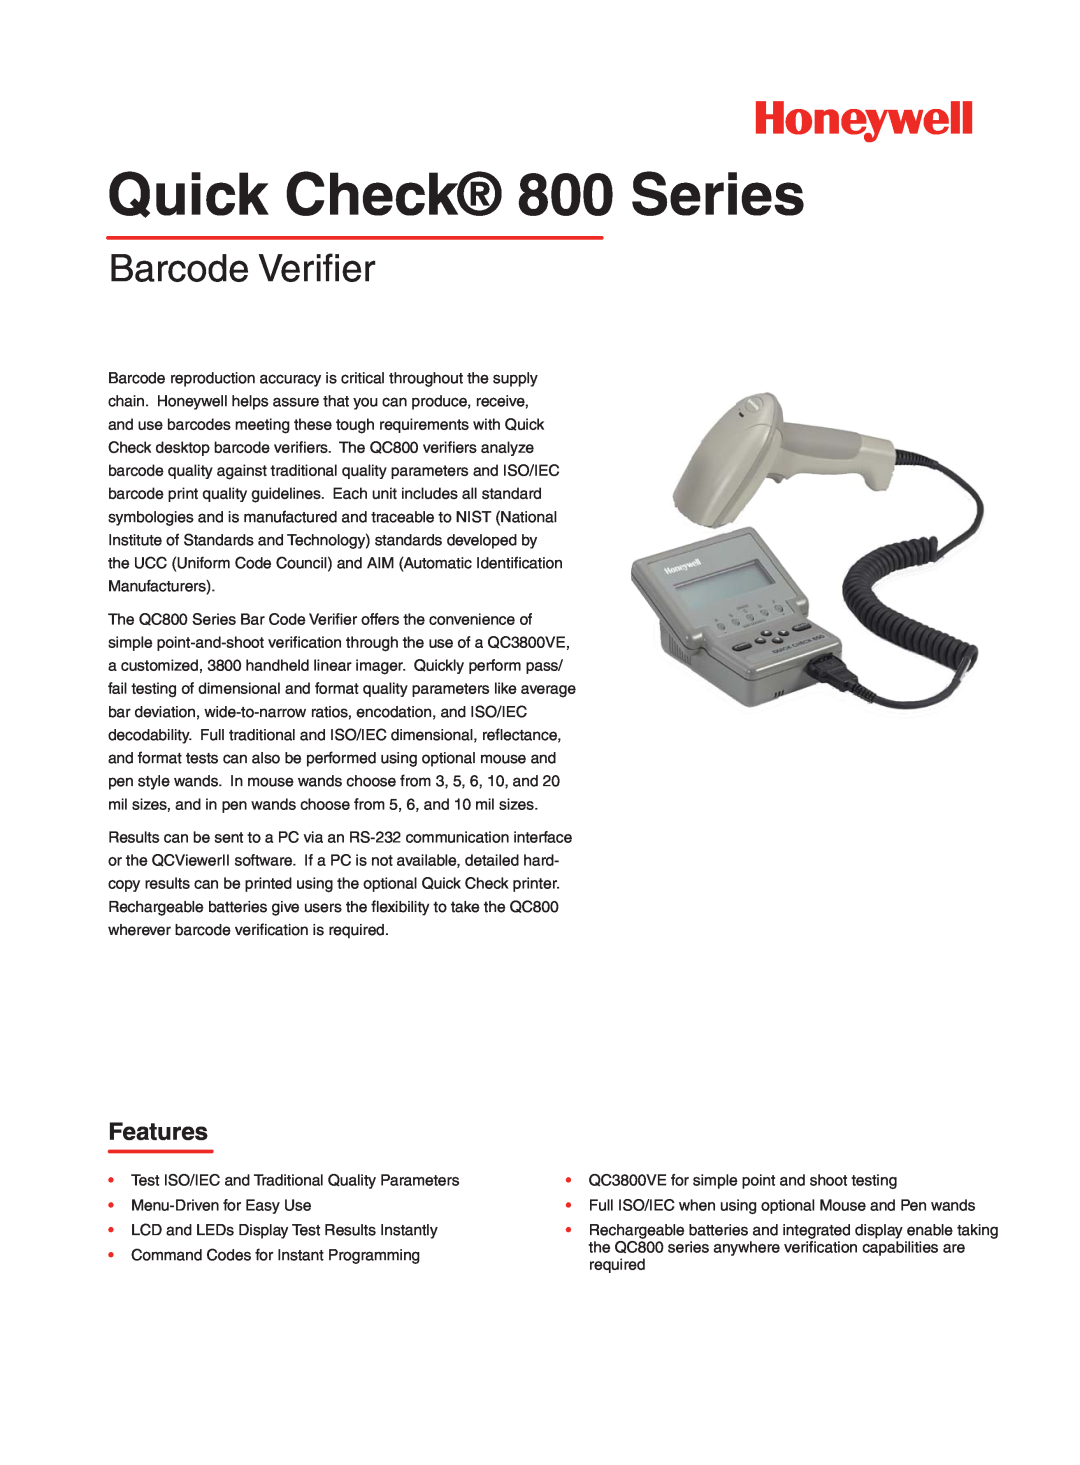 Honeywell manual Quick Check 800 Series, Barcode Veriﬁer, Features 